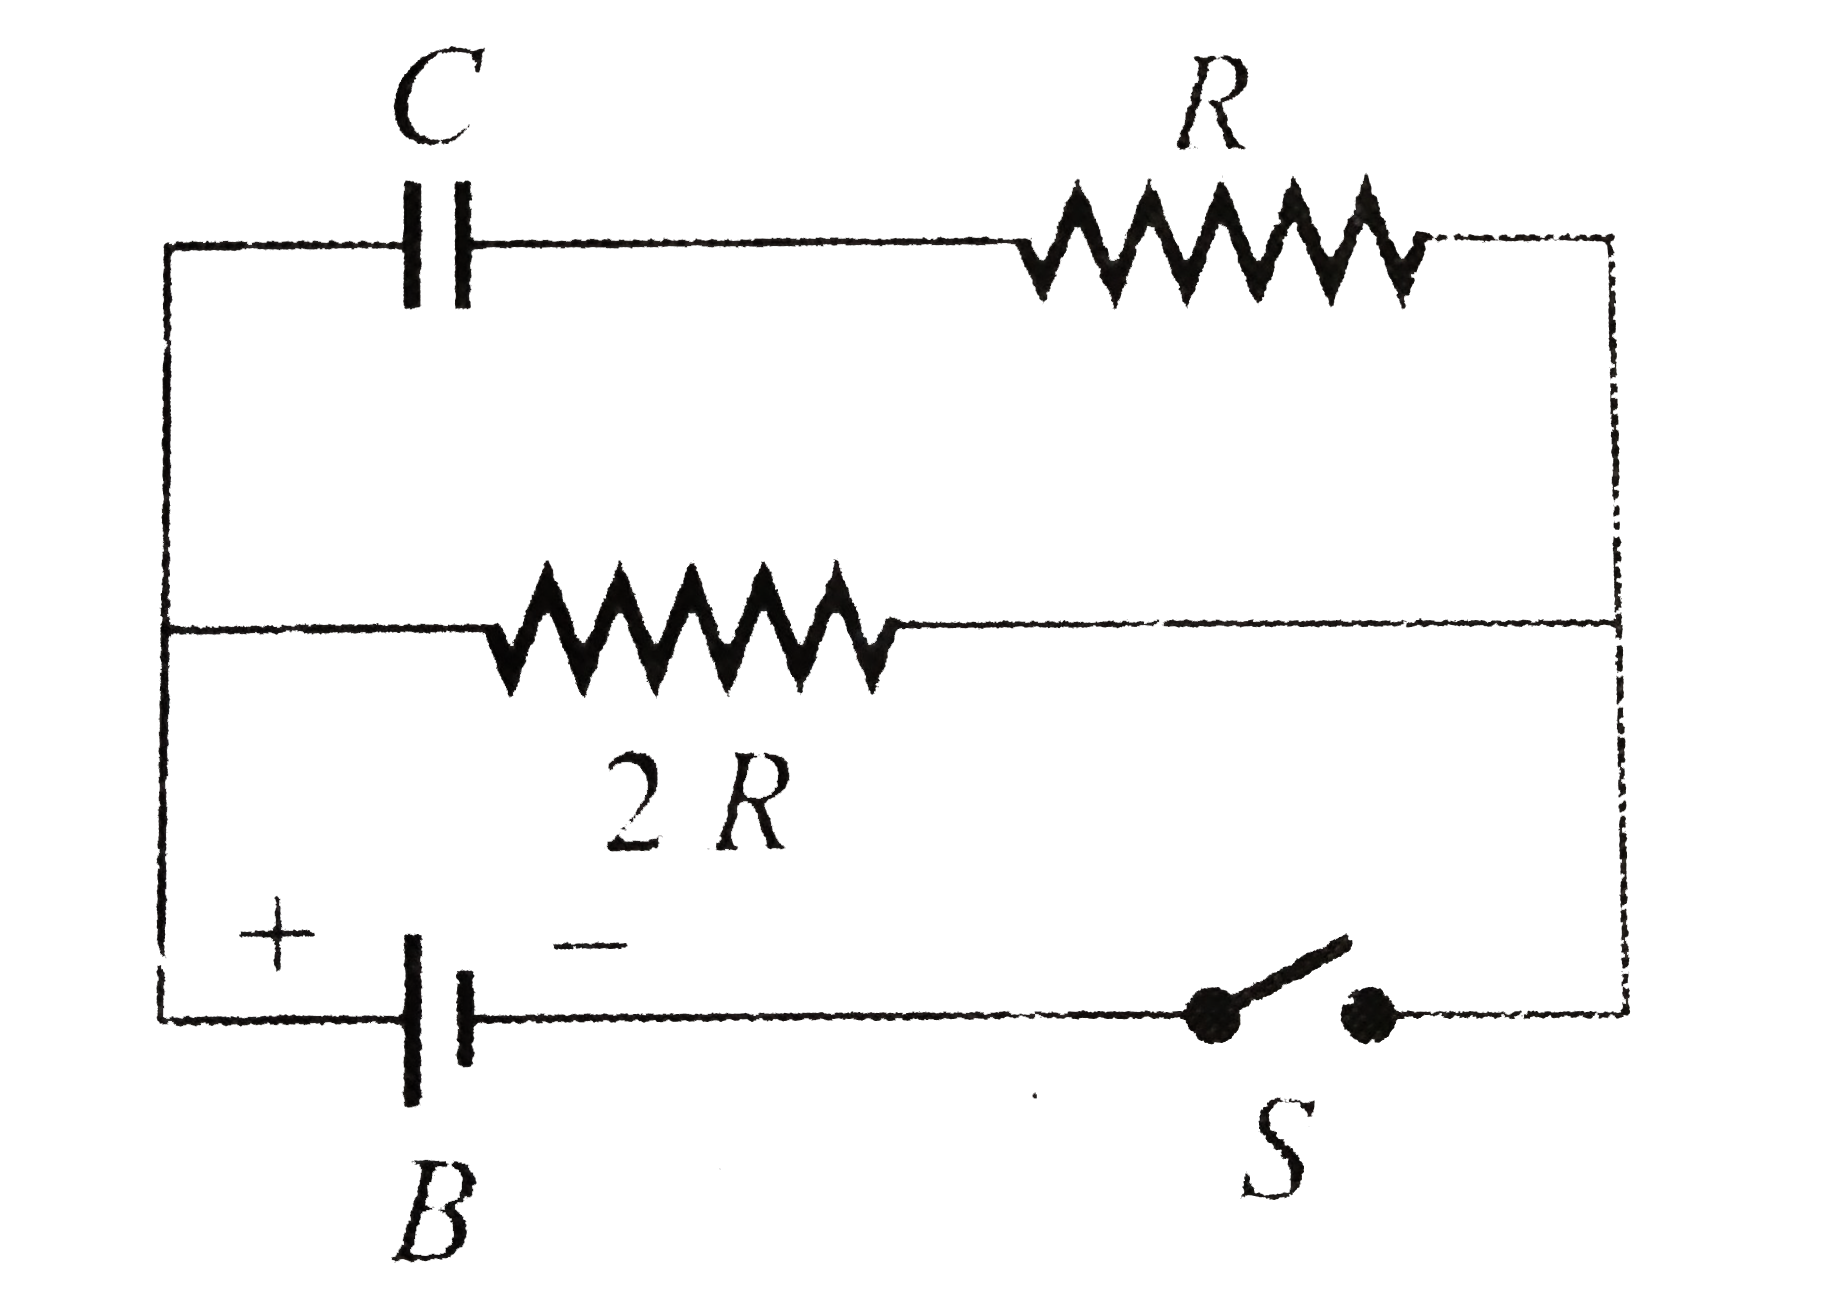 In the circuit shown in fig, if the switch S is closed at t = 0 , the capacitor charges with a time constant